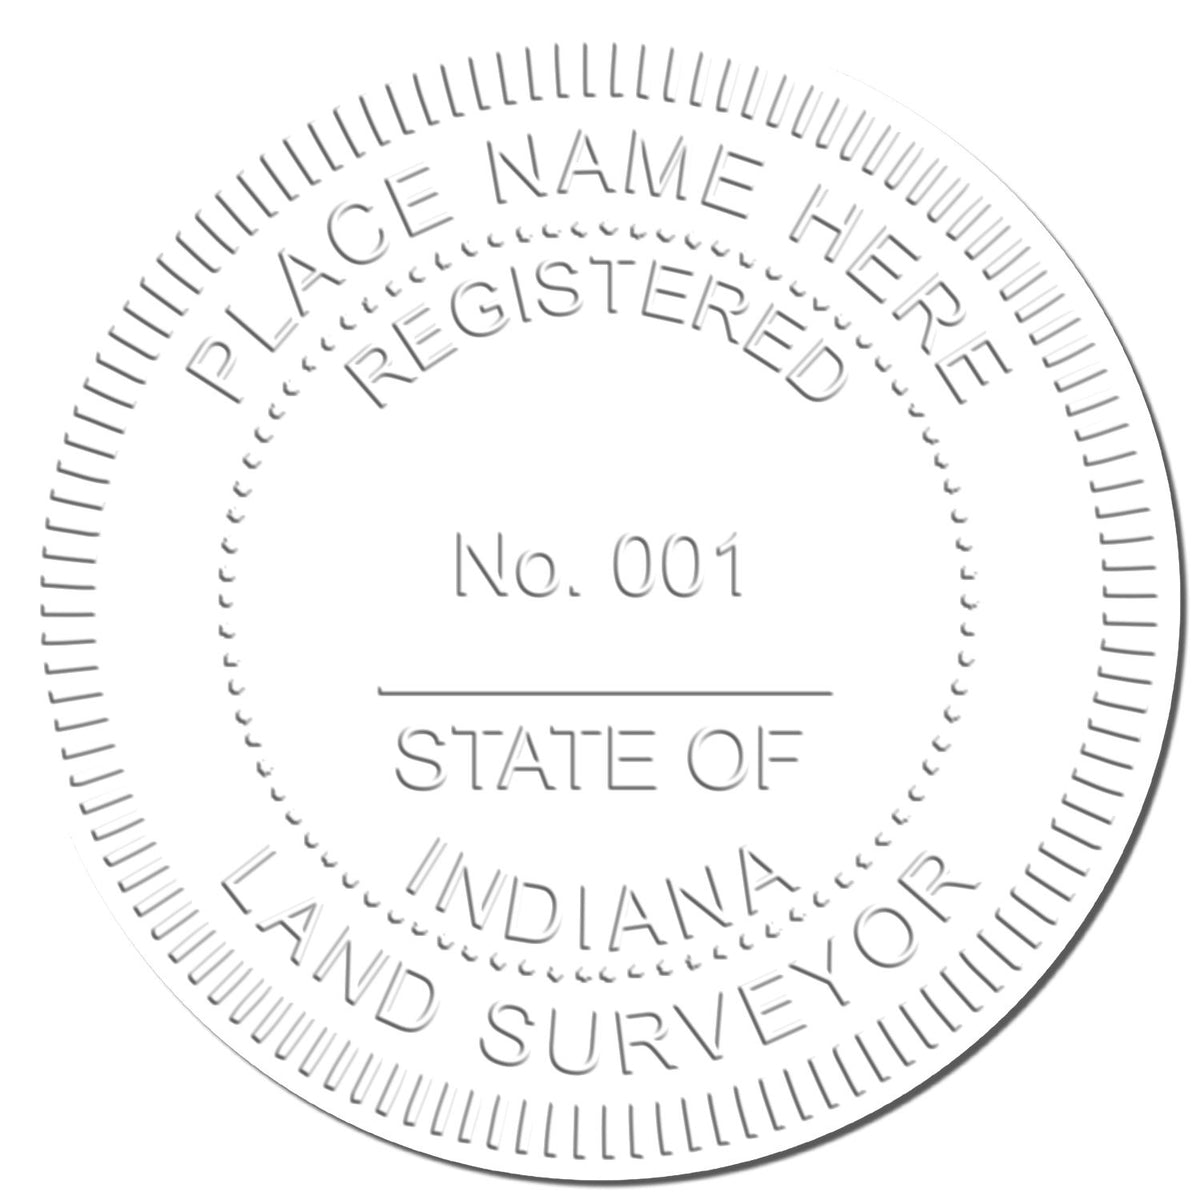 This paper is stamped with a sample imprint of the Indiana Desk Surveyor Seal Embosser, signifying its quality and reliability.